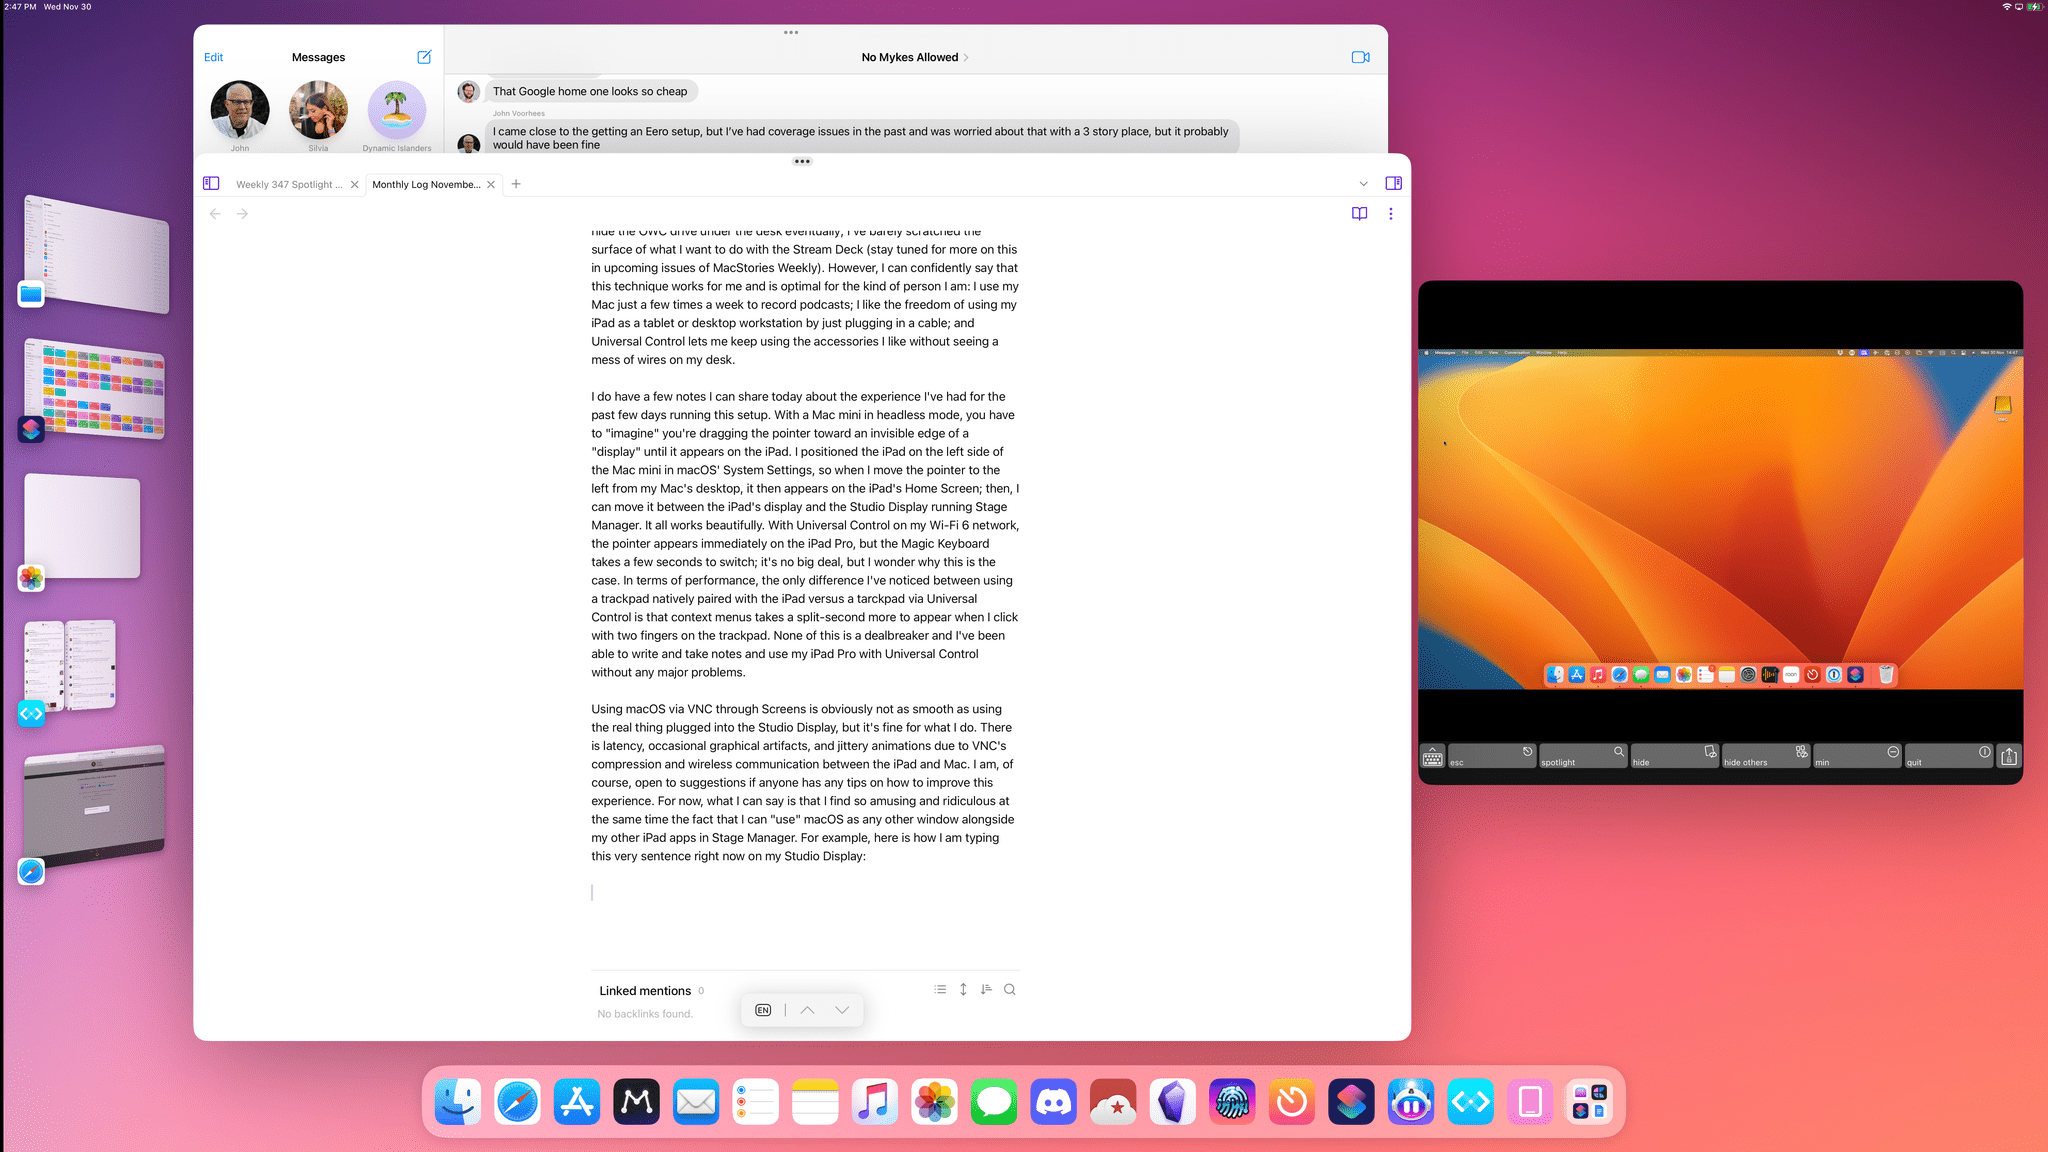 That's macOS as another window in iPadOS Stage Manager.